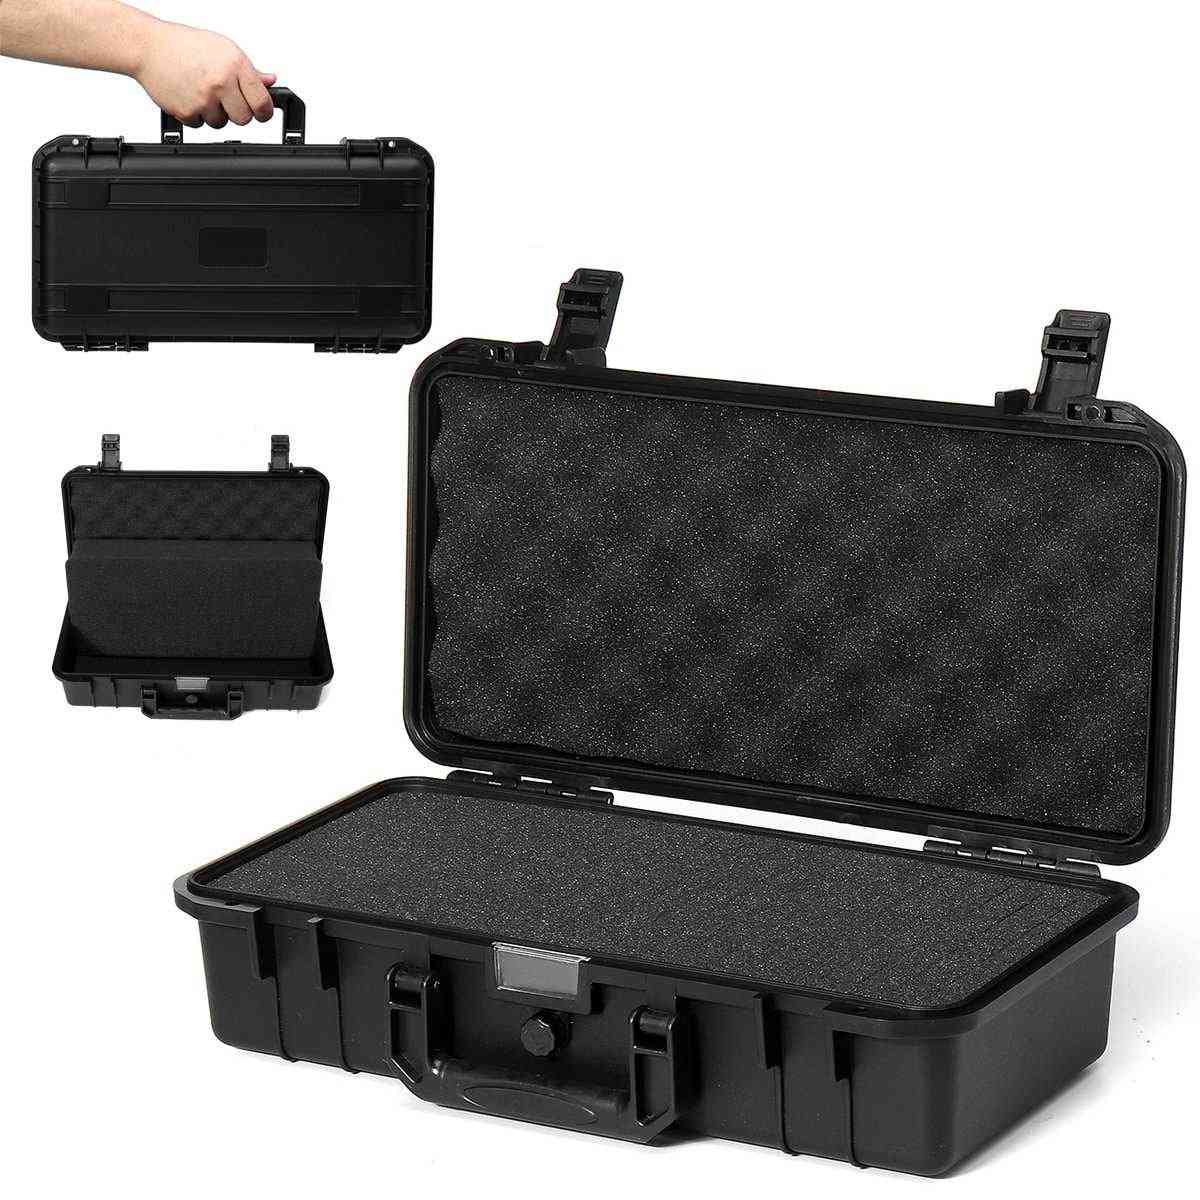 Protective Safety Instrument Waterproof Shockproof Toolbox With Sponge